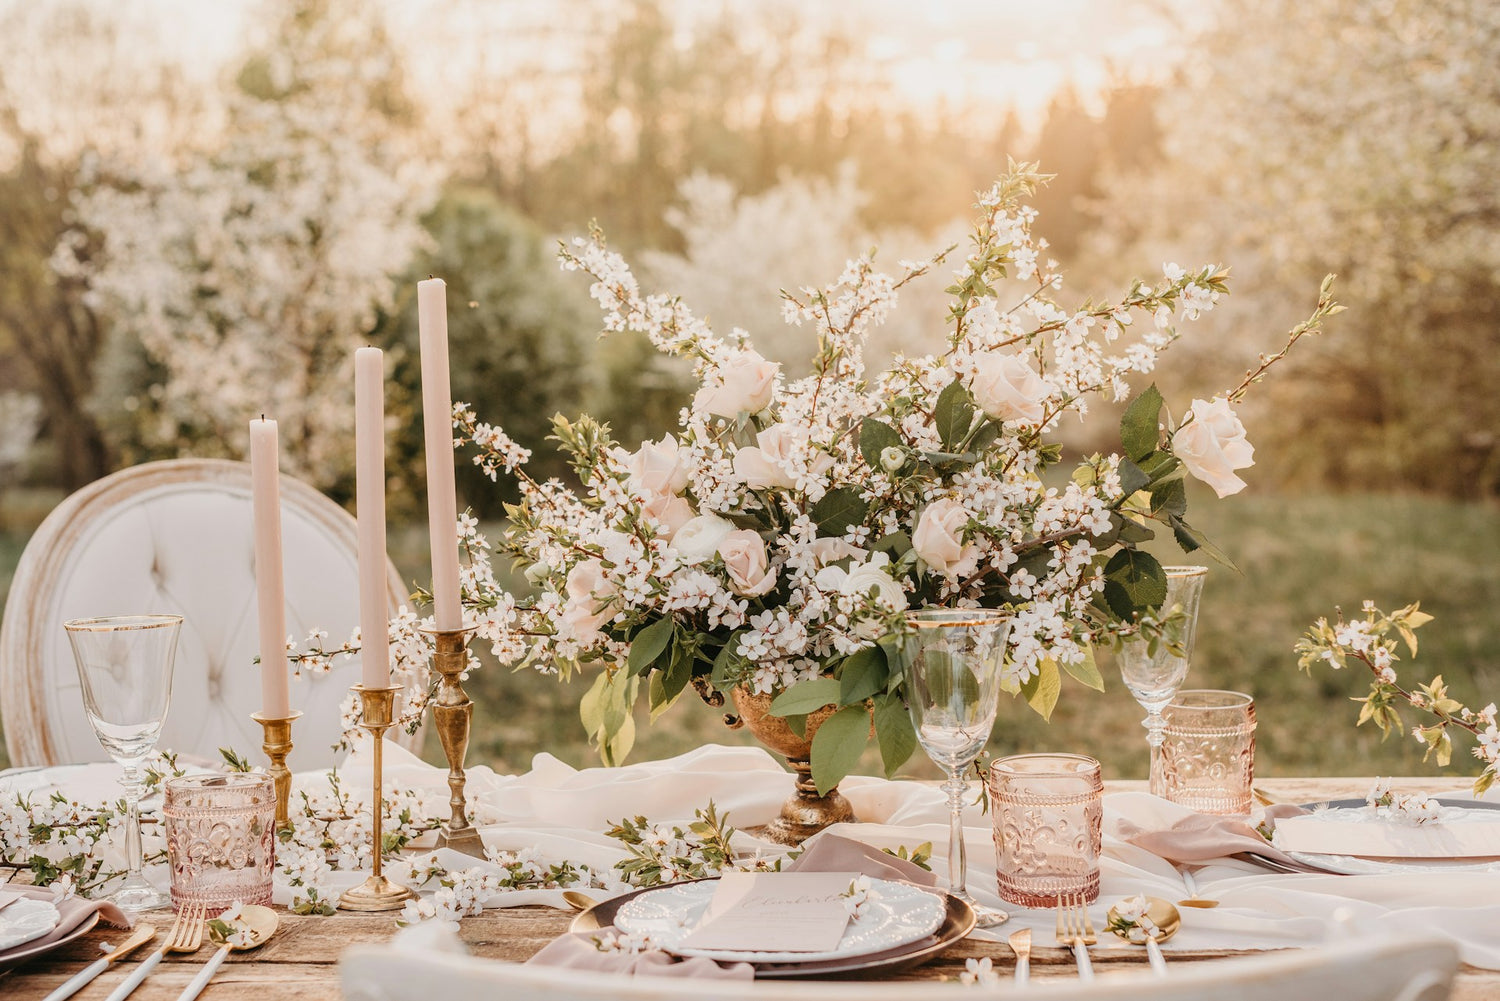 Romantic Wedding Tablescape: Elegant Rose Centrepieces and Candles for an Enchanting Reception